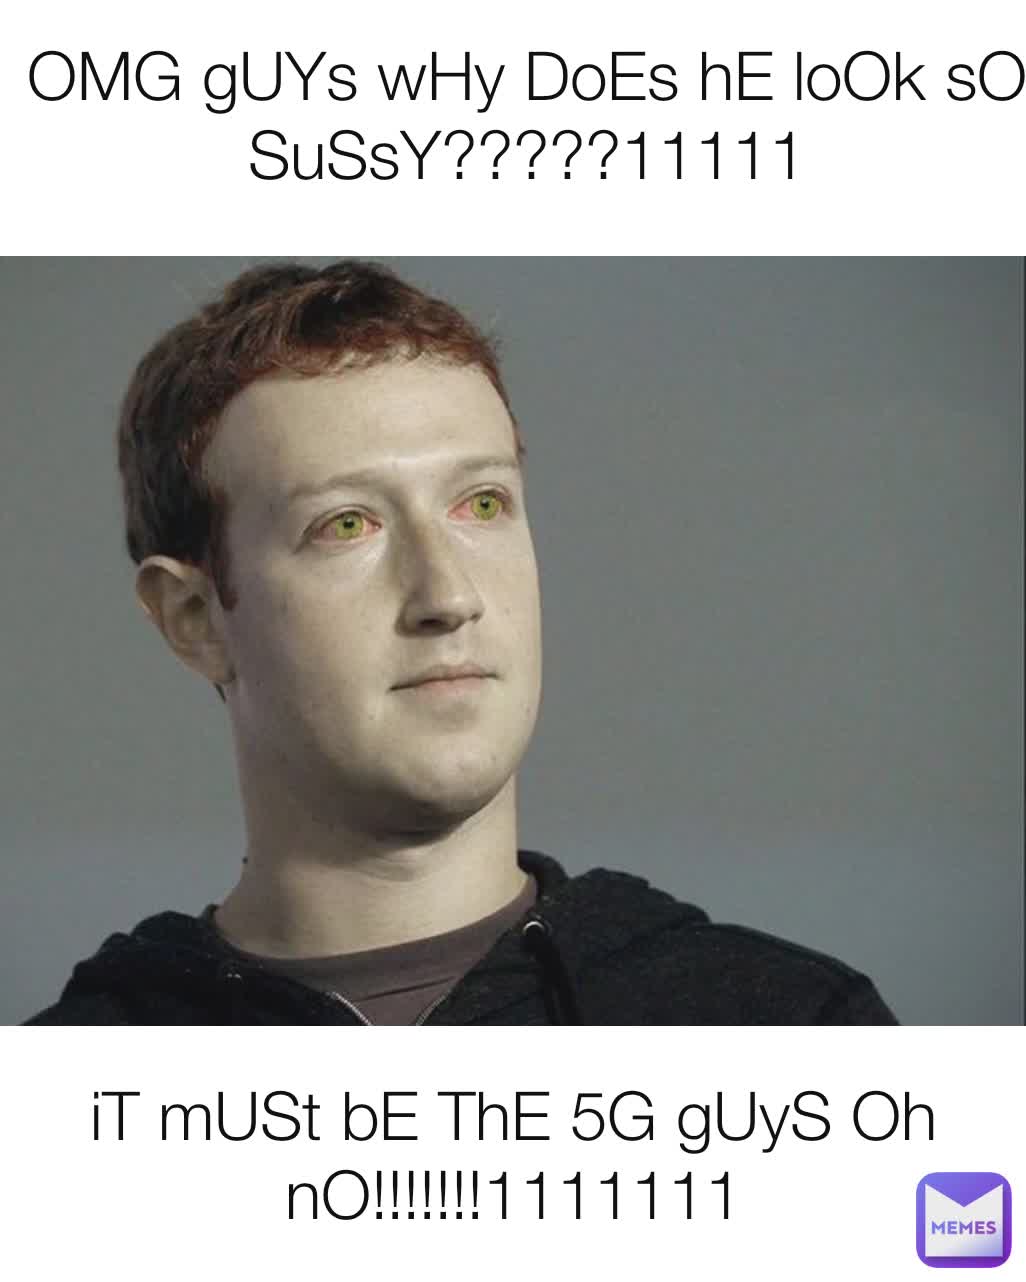 OMG gUYs wHy DoEs hE loOk sO SuSsY?????11111 iT mUSt bE ThE 5G gUyS Oh nO!!!!!!!1111111